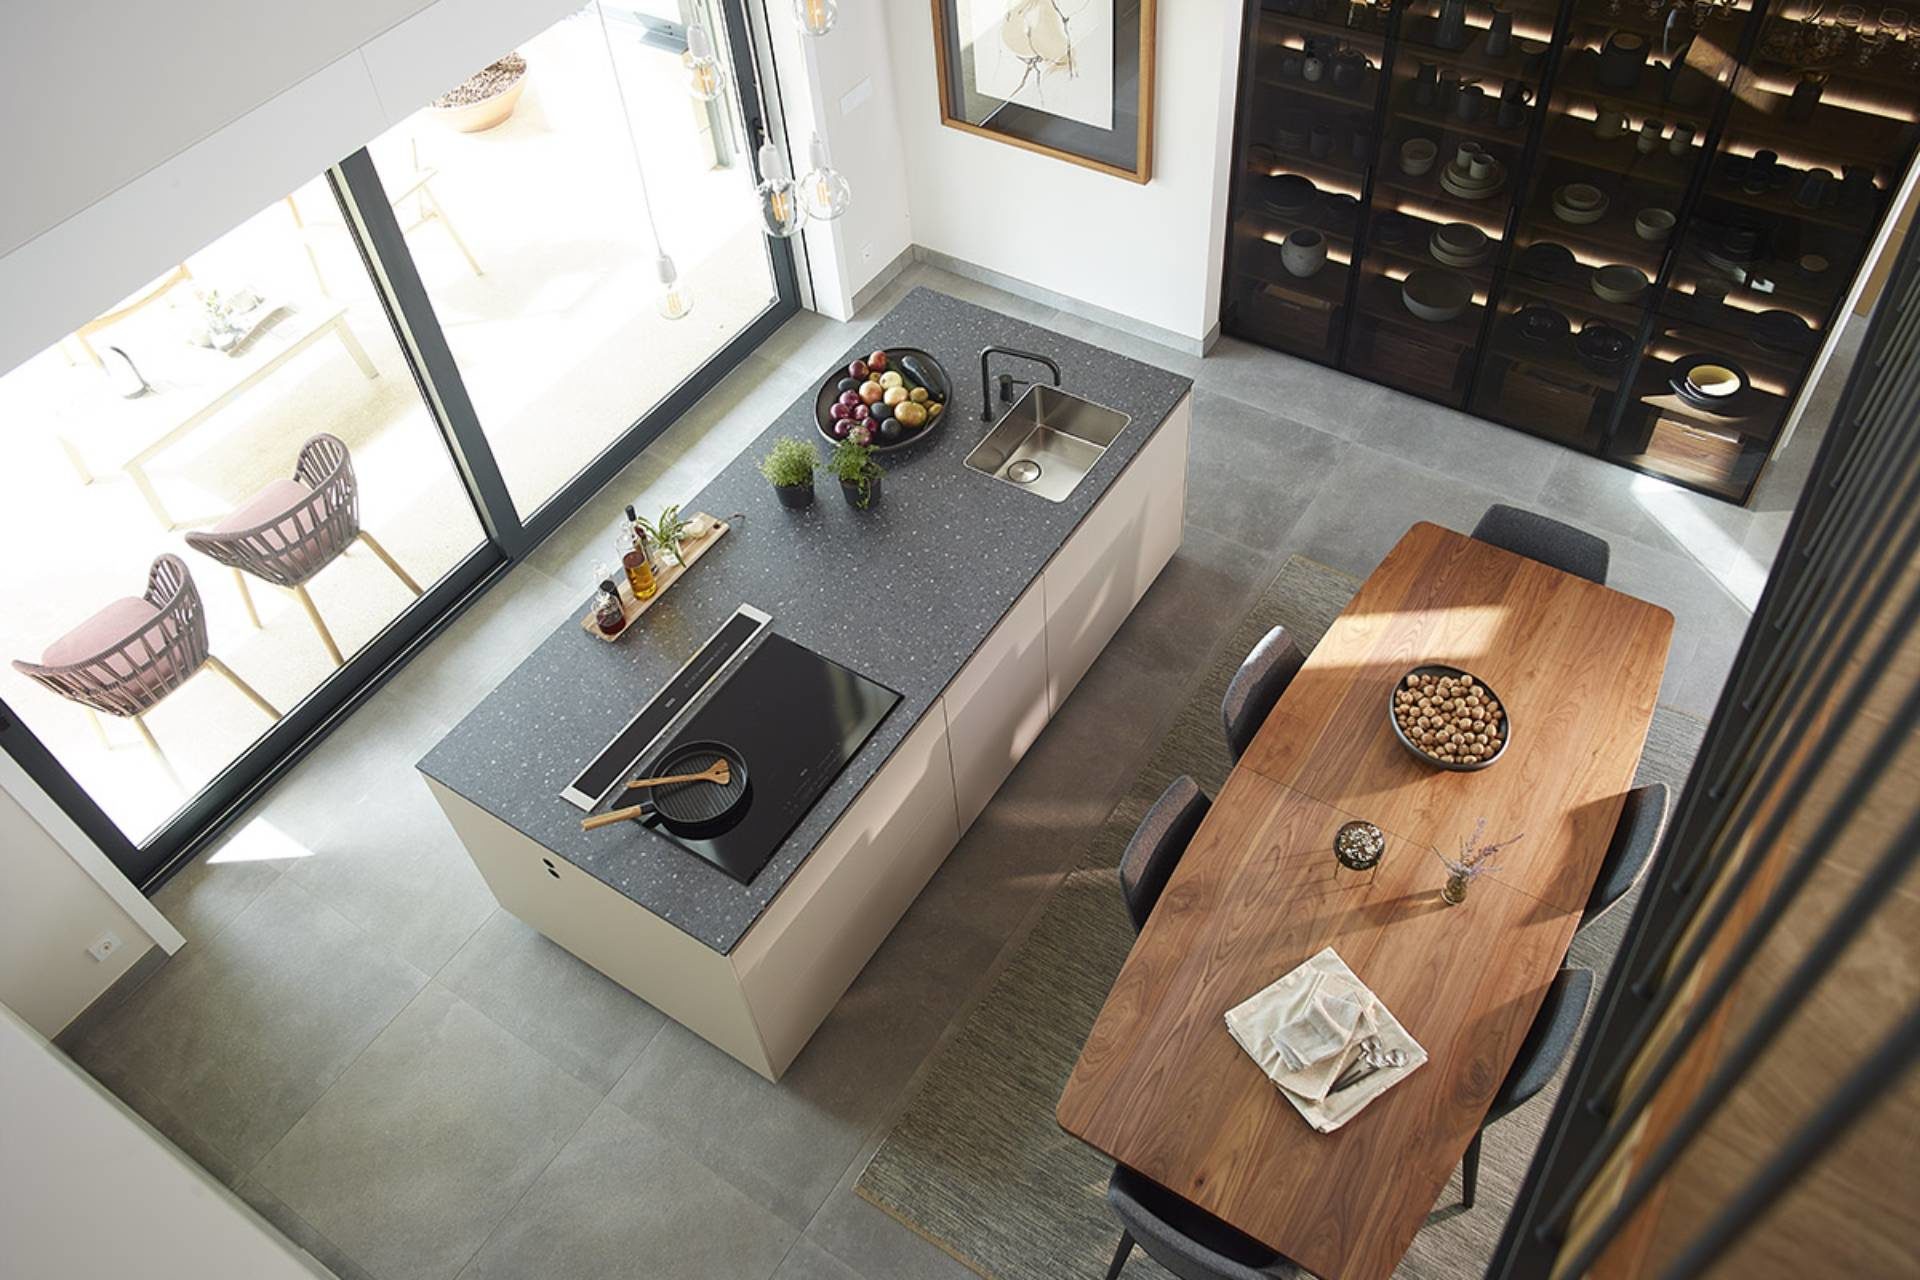 Overhead view of a kitchen with a central island, a smoked glass cabinet and a dining table